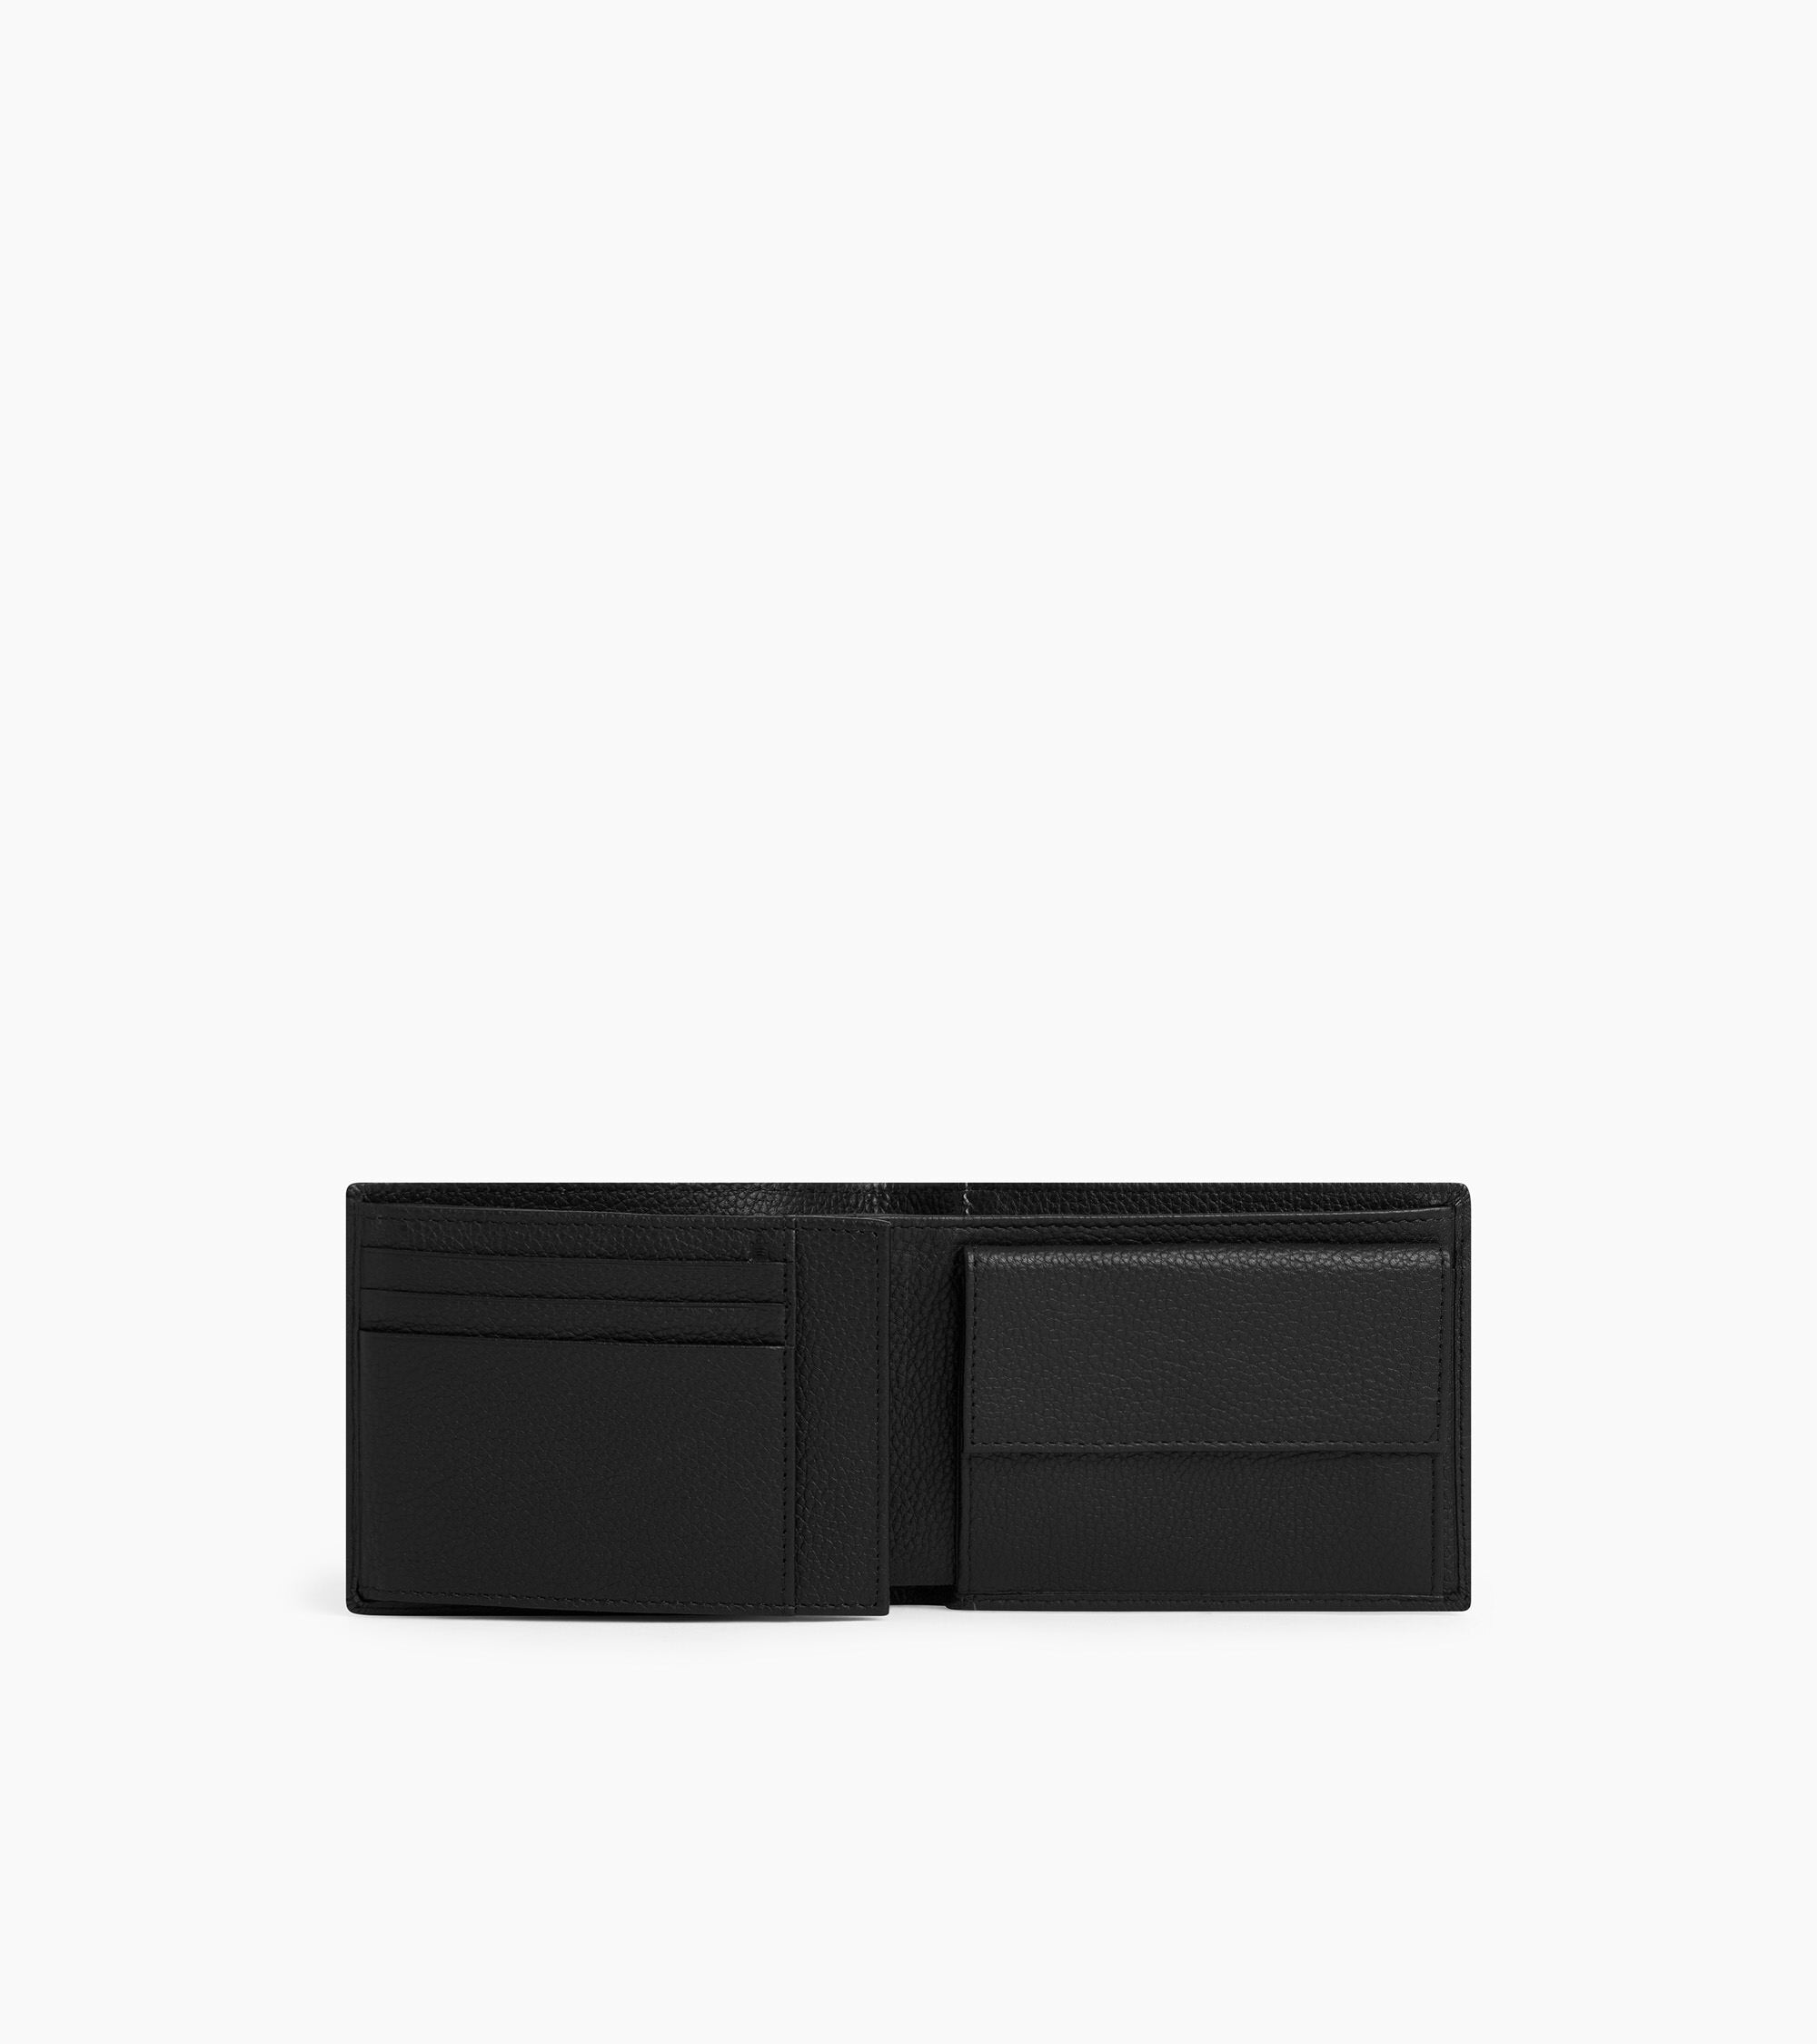 Flap 2 shutters Charles pebbled leather wallet